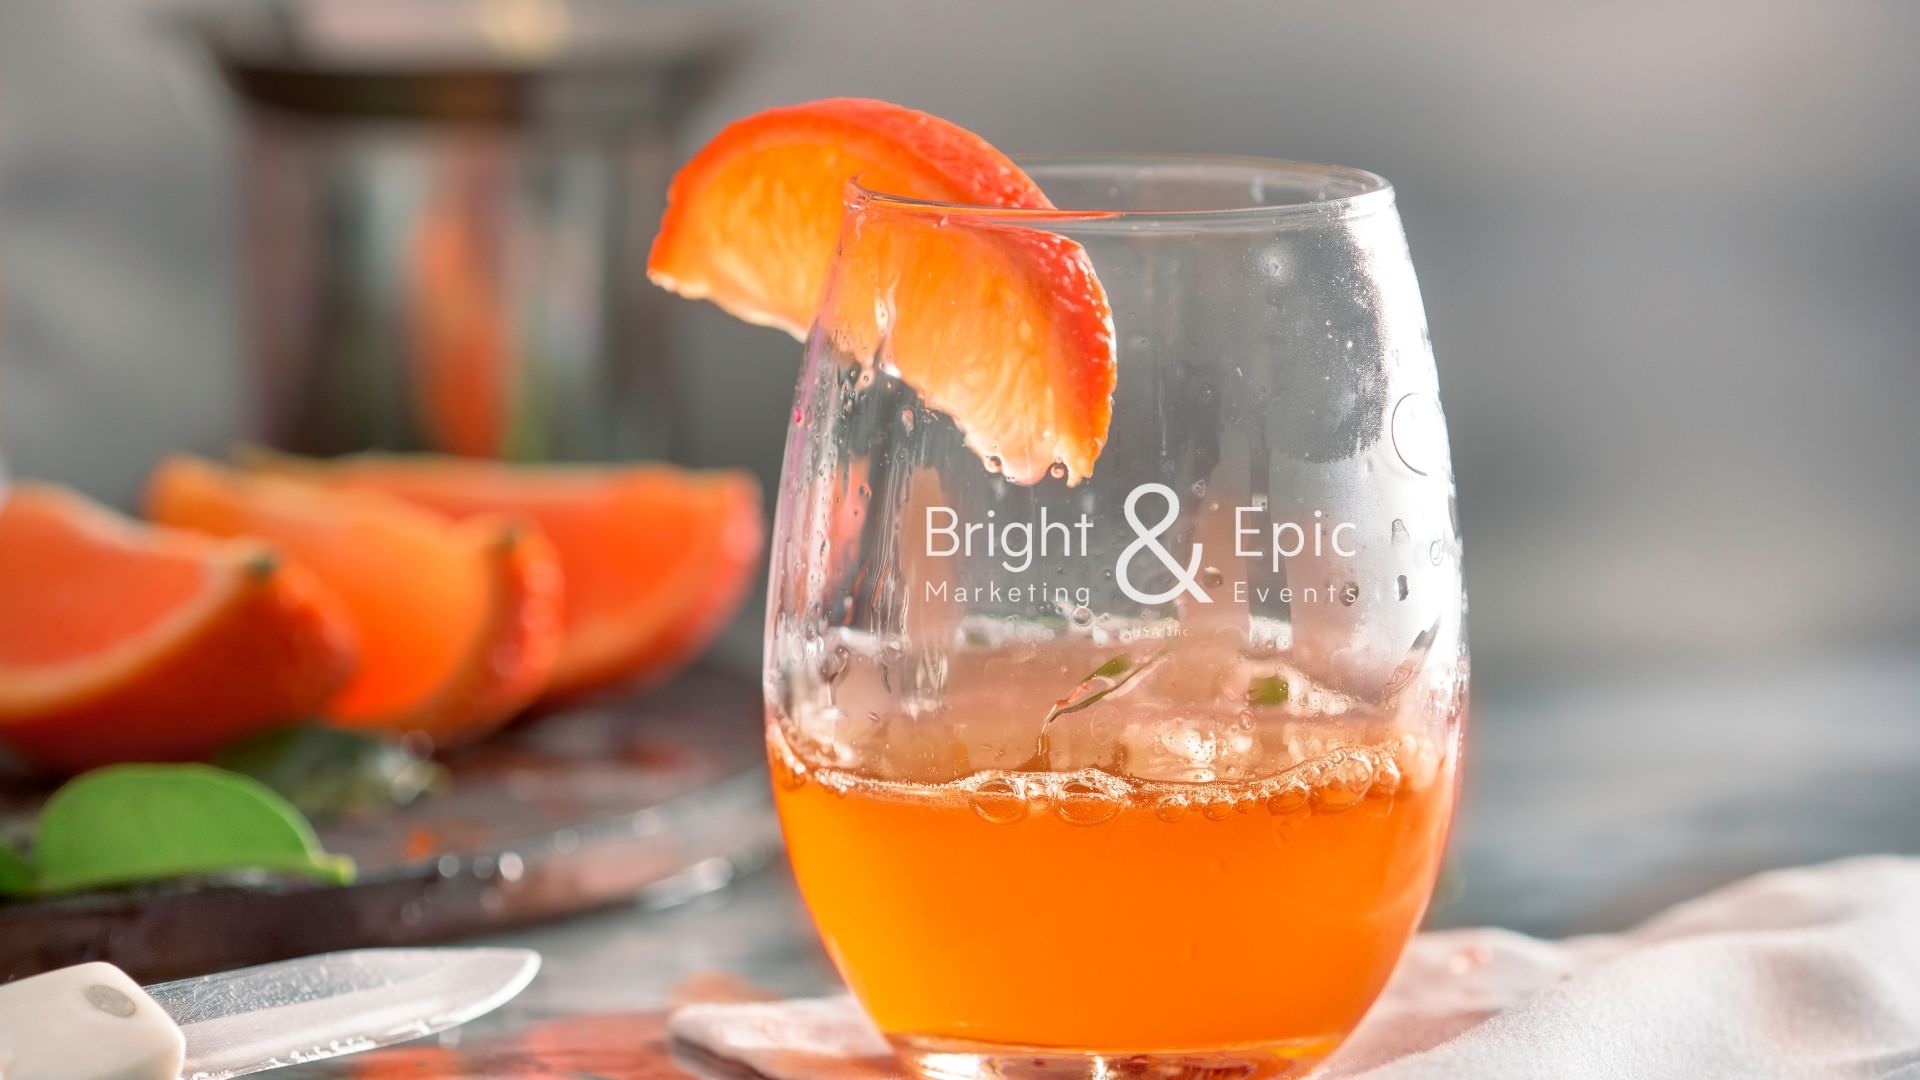 virtual-cocktail-party-cocktail-class-online-brightandepic-events-usa